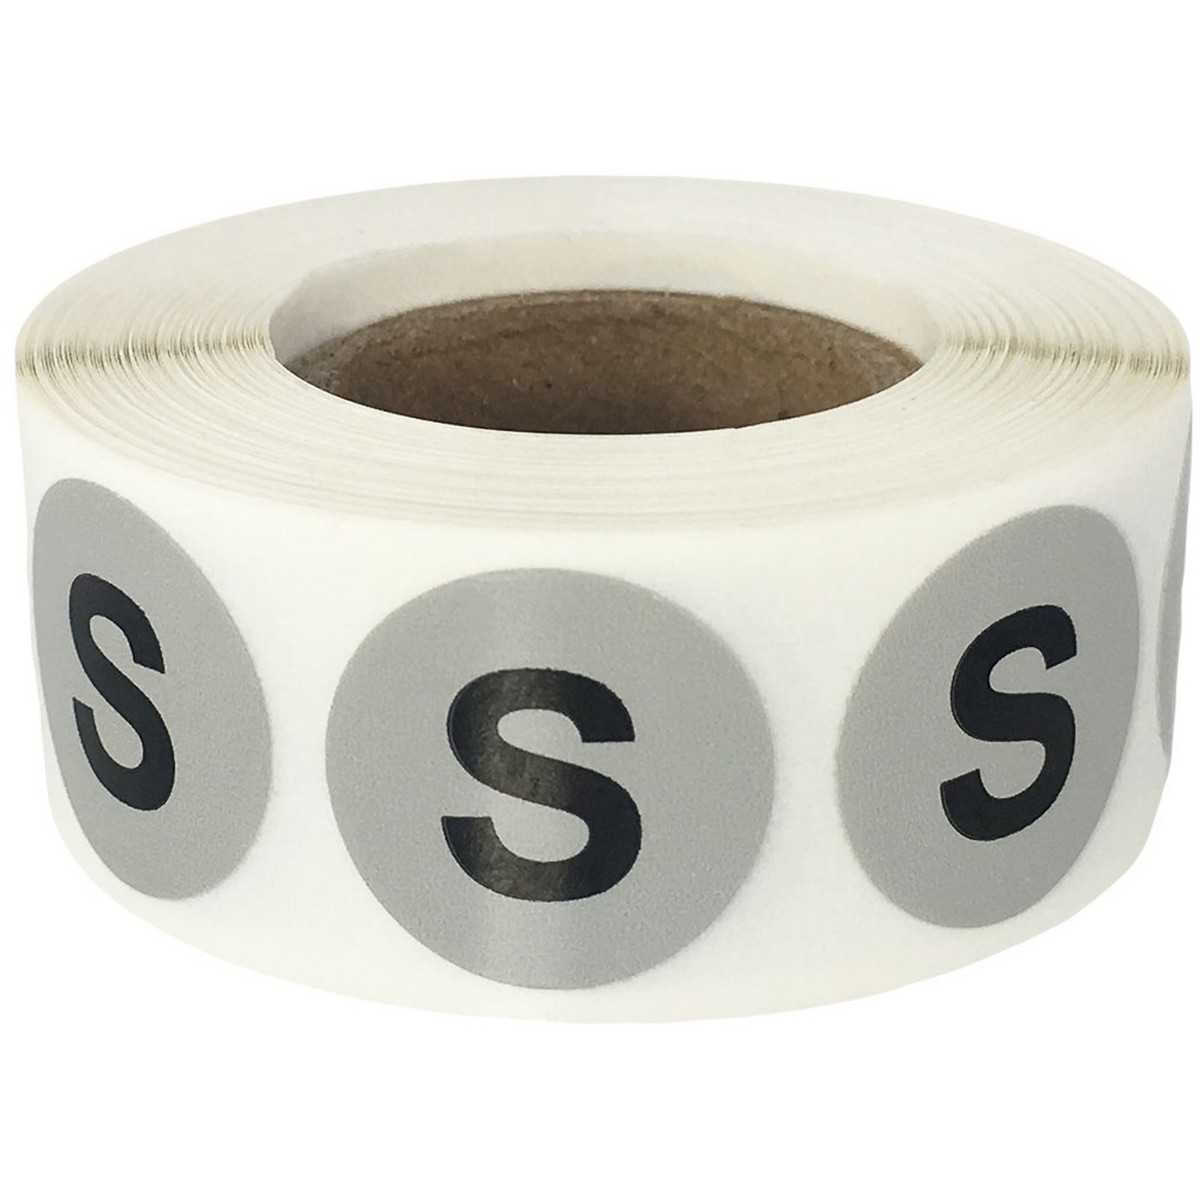 1/2 ( XL ) X-Large Stickers Labels for Retail, Clothing, Clothing Sizes  Etc (10 Rolls / Black) 